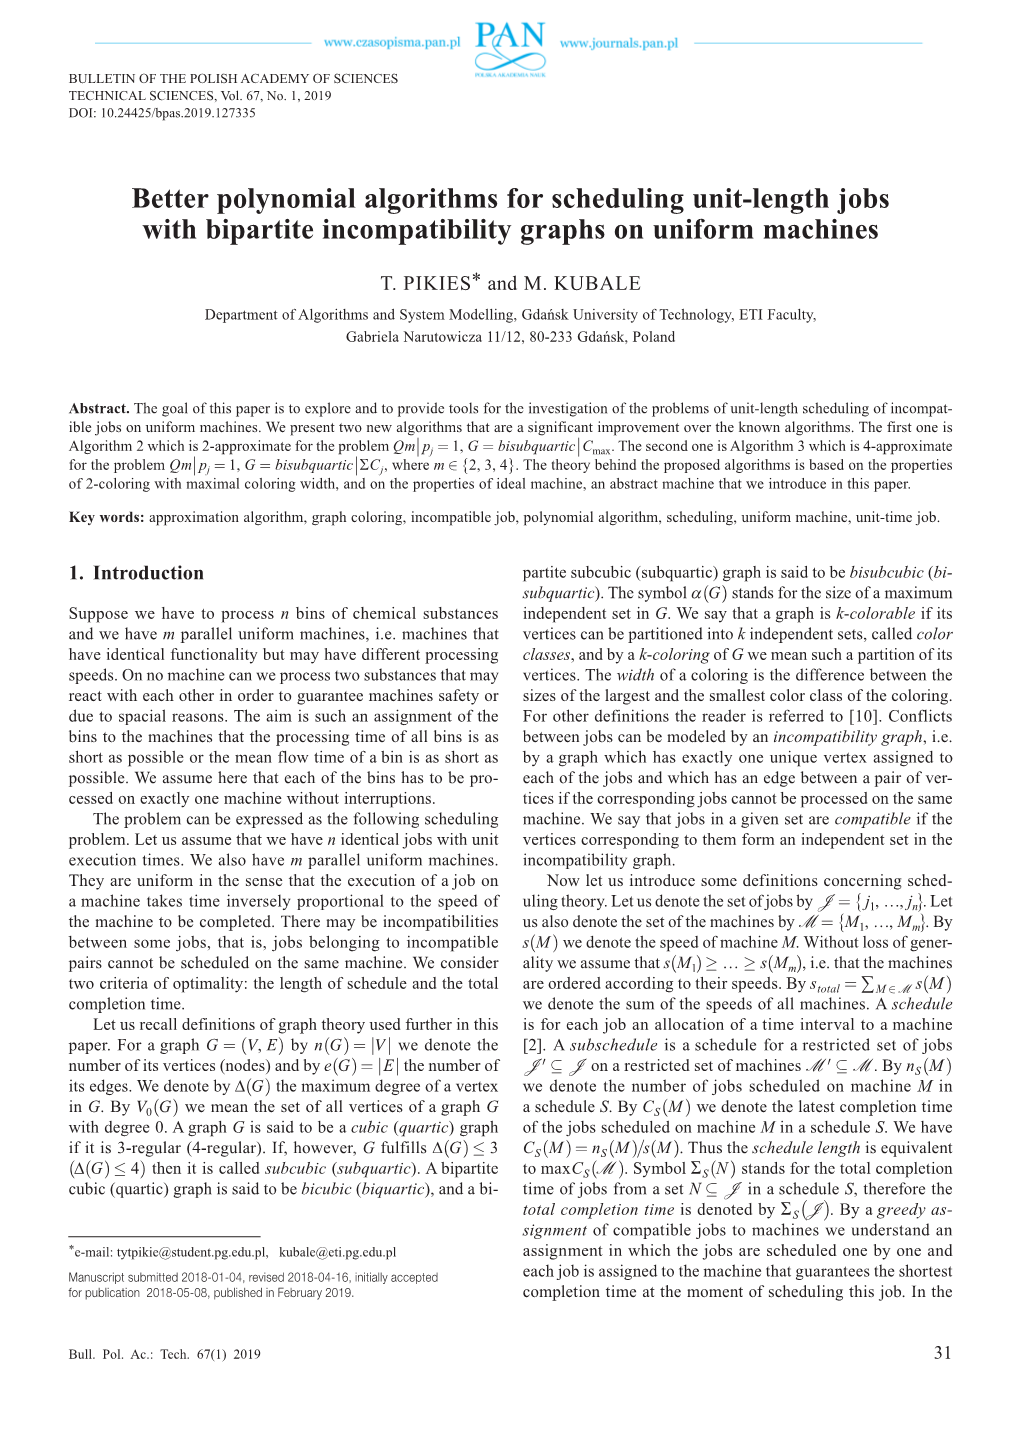 Better Polynomial Algorithms for Scheduling Unit-Length Jobs with Bipartite Incompatibility Graphs on Uniform Machines